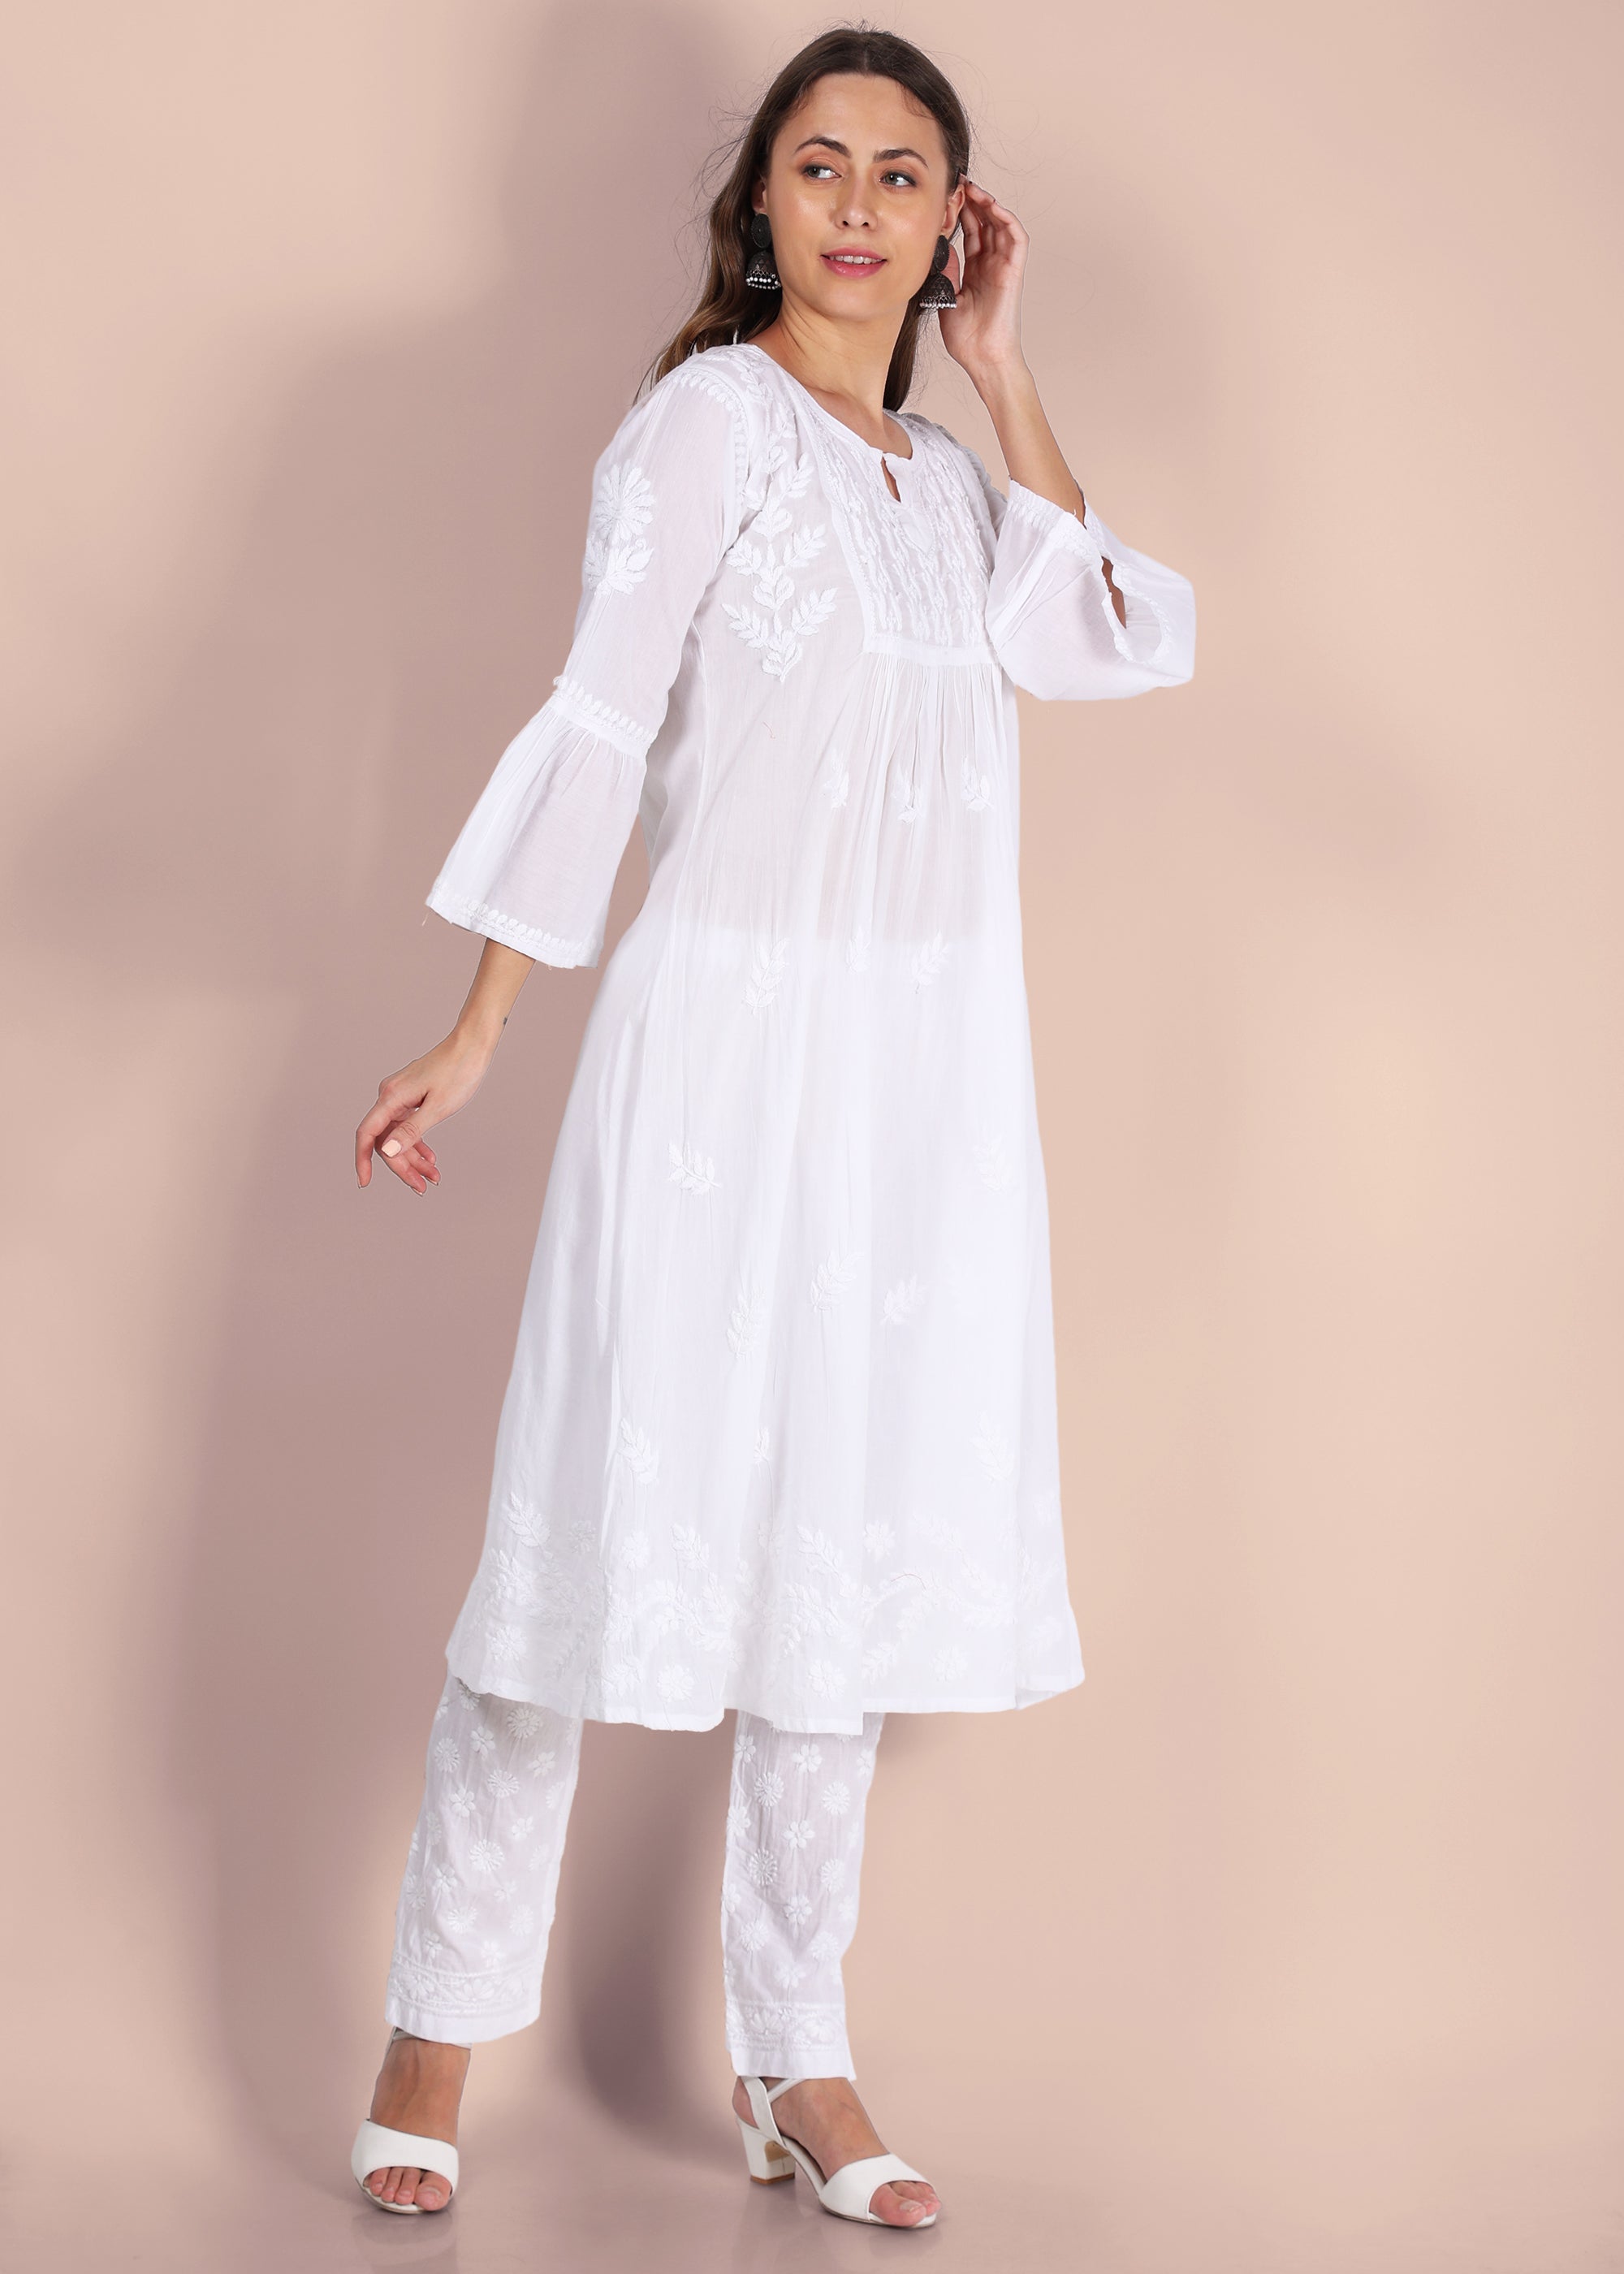 WHITE BY POONAM DESIGNER BRAND - PURE RAYON FRANT AND BACK FULL CHIKAN WORK  KURTI WITH HEAVY COTTON SLUB PANT AND PREMIUM QUALITY NAZNEEN DUPATTA WITH  PUM-PUM LACE - WHOLESALER AND DEALER